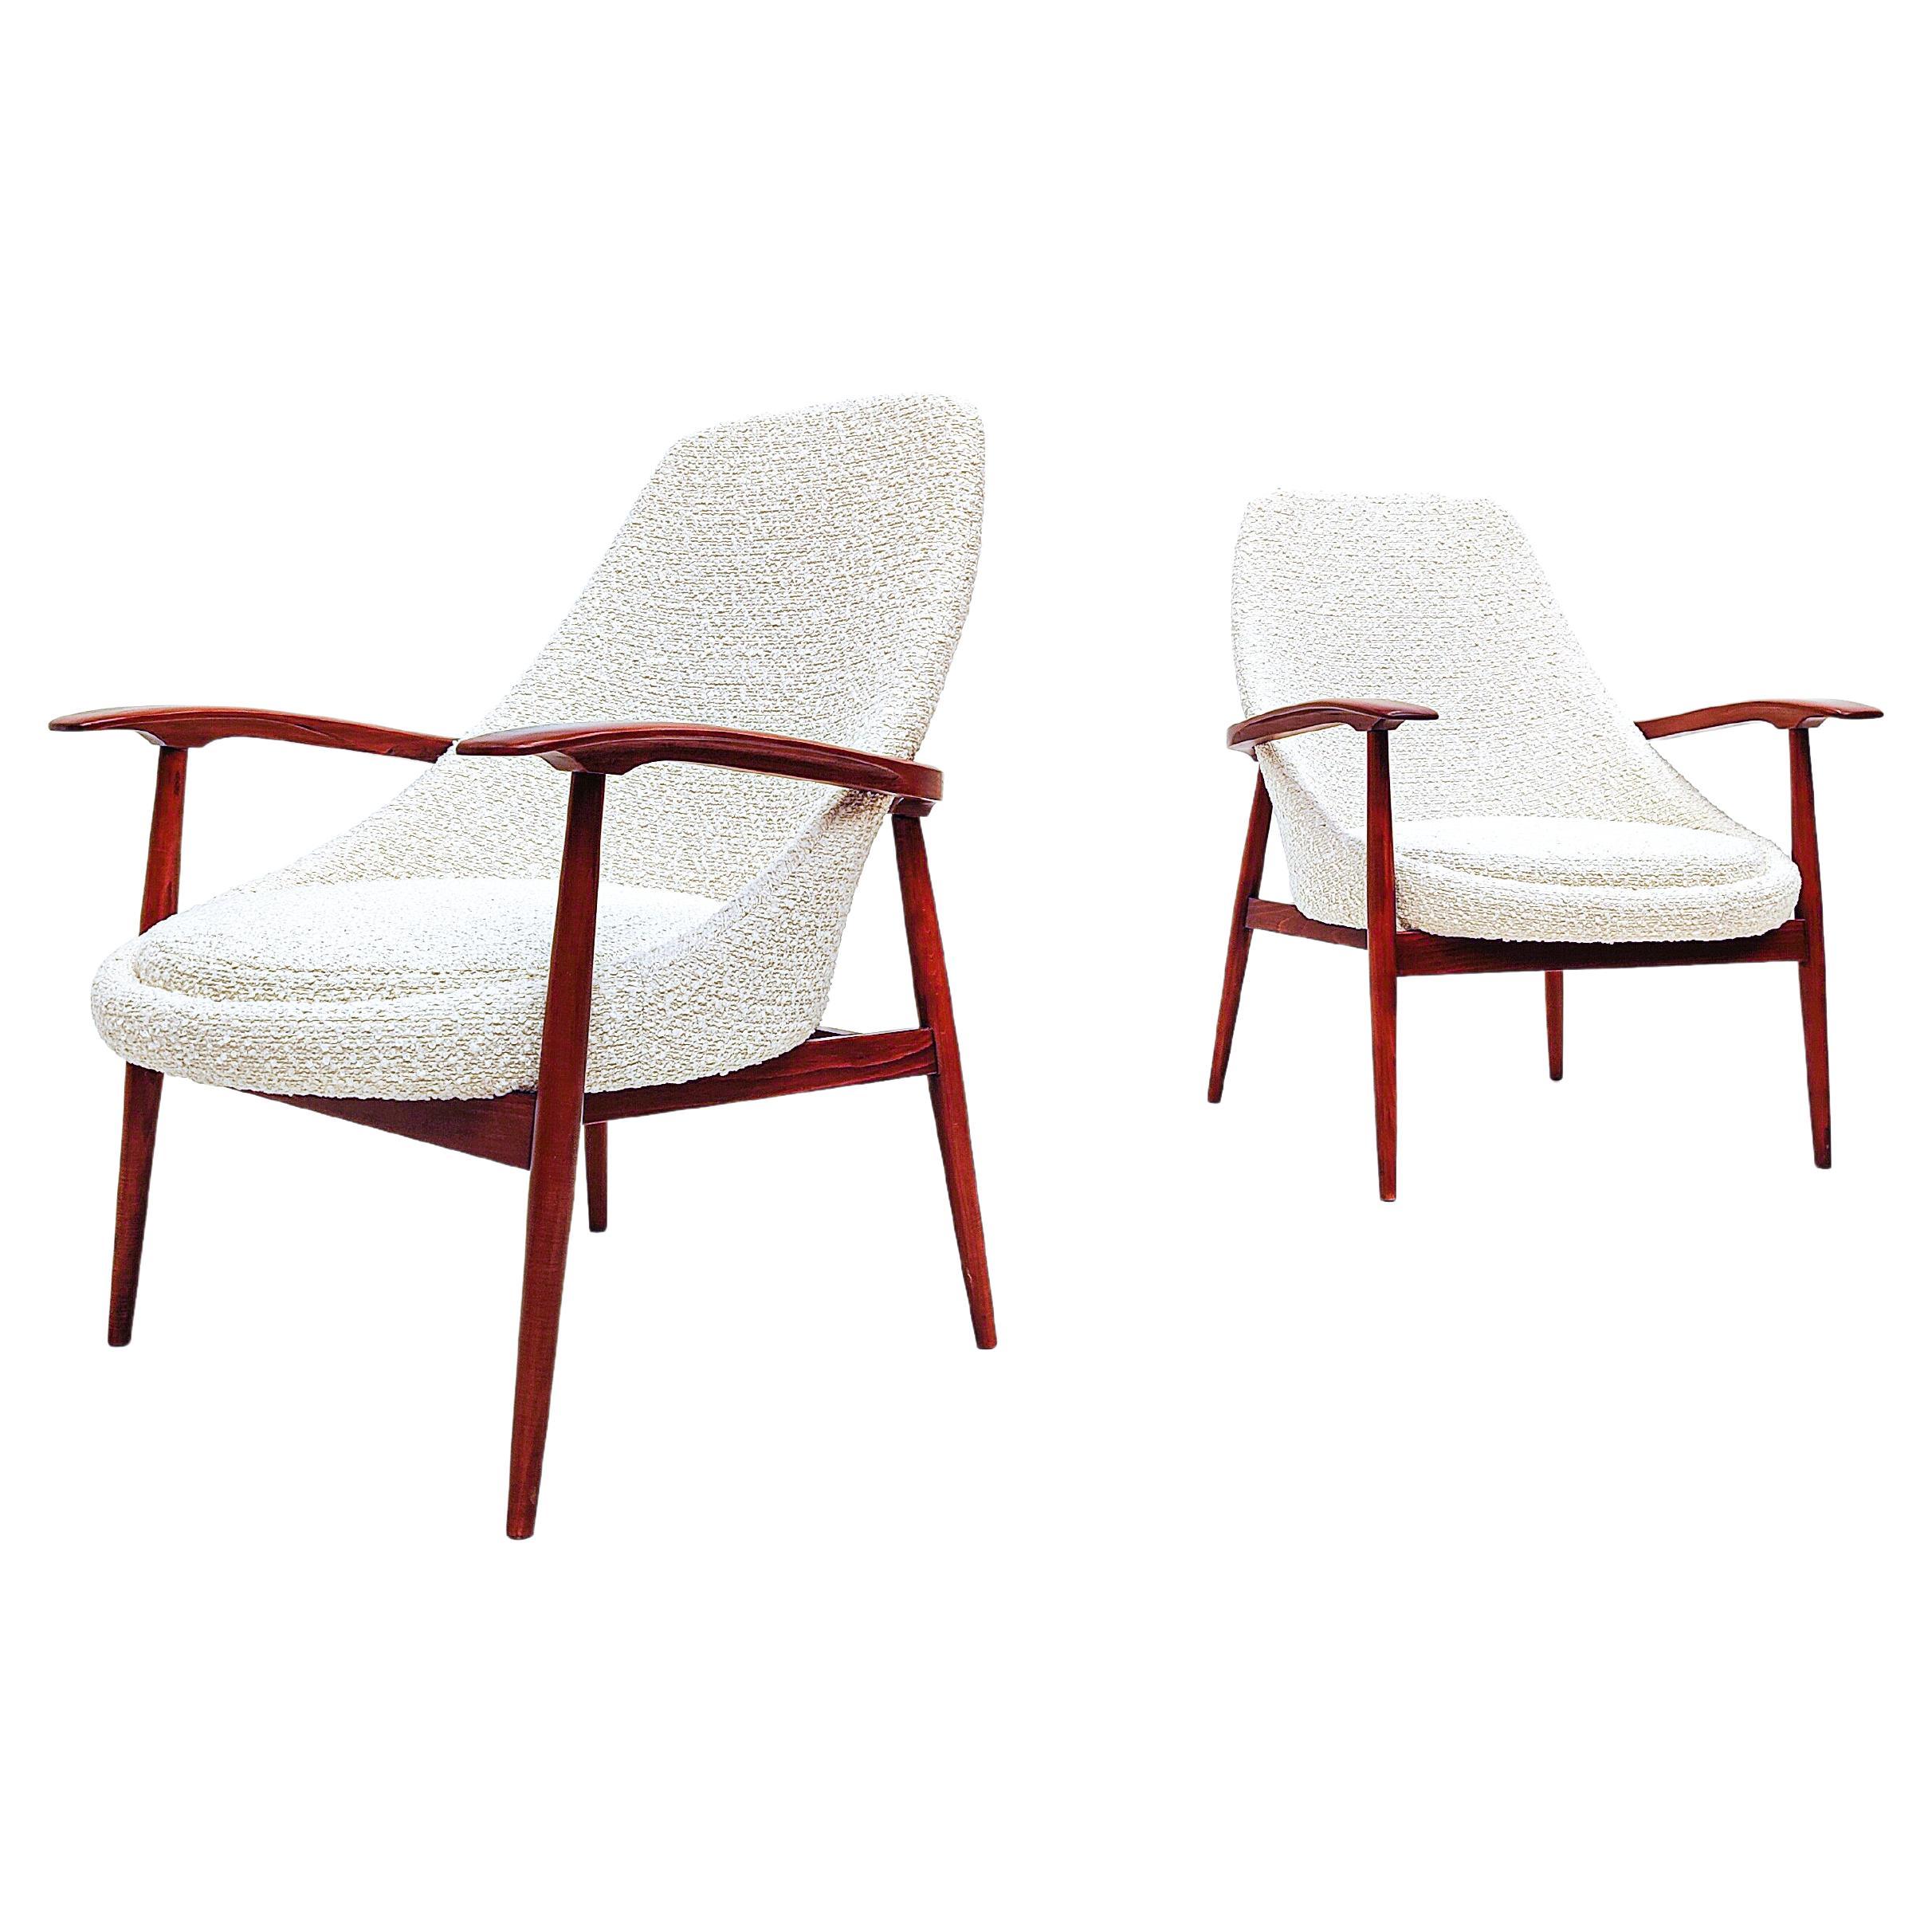 Pair of Mid-Century Armchairs, Wood and White Boucle Fabric, Italy 1960s For Sale